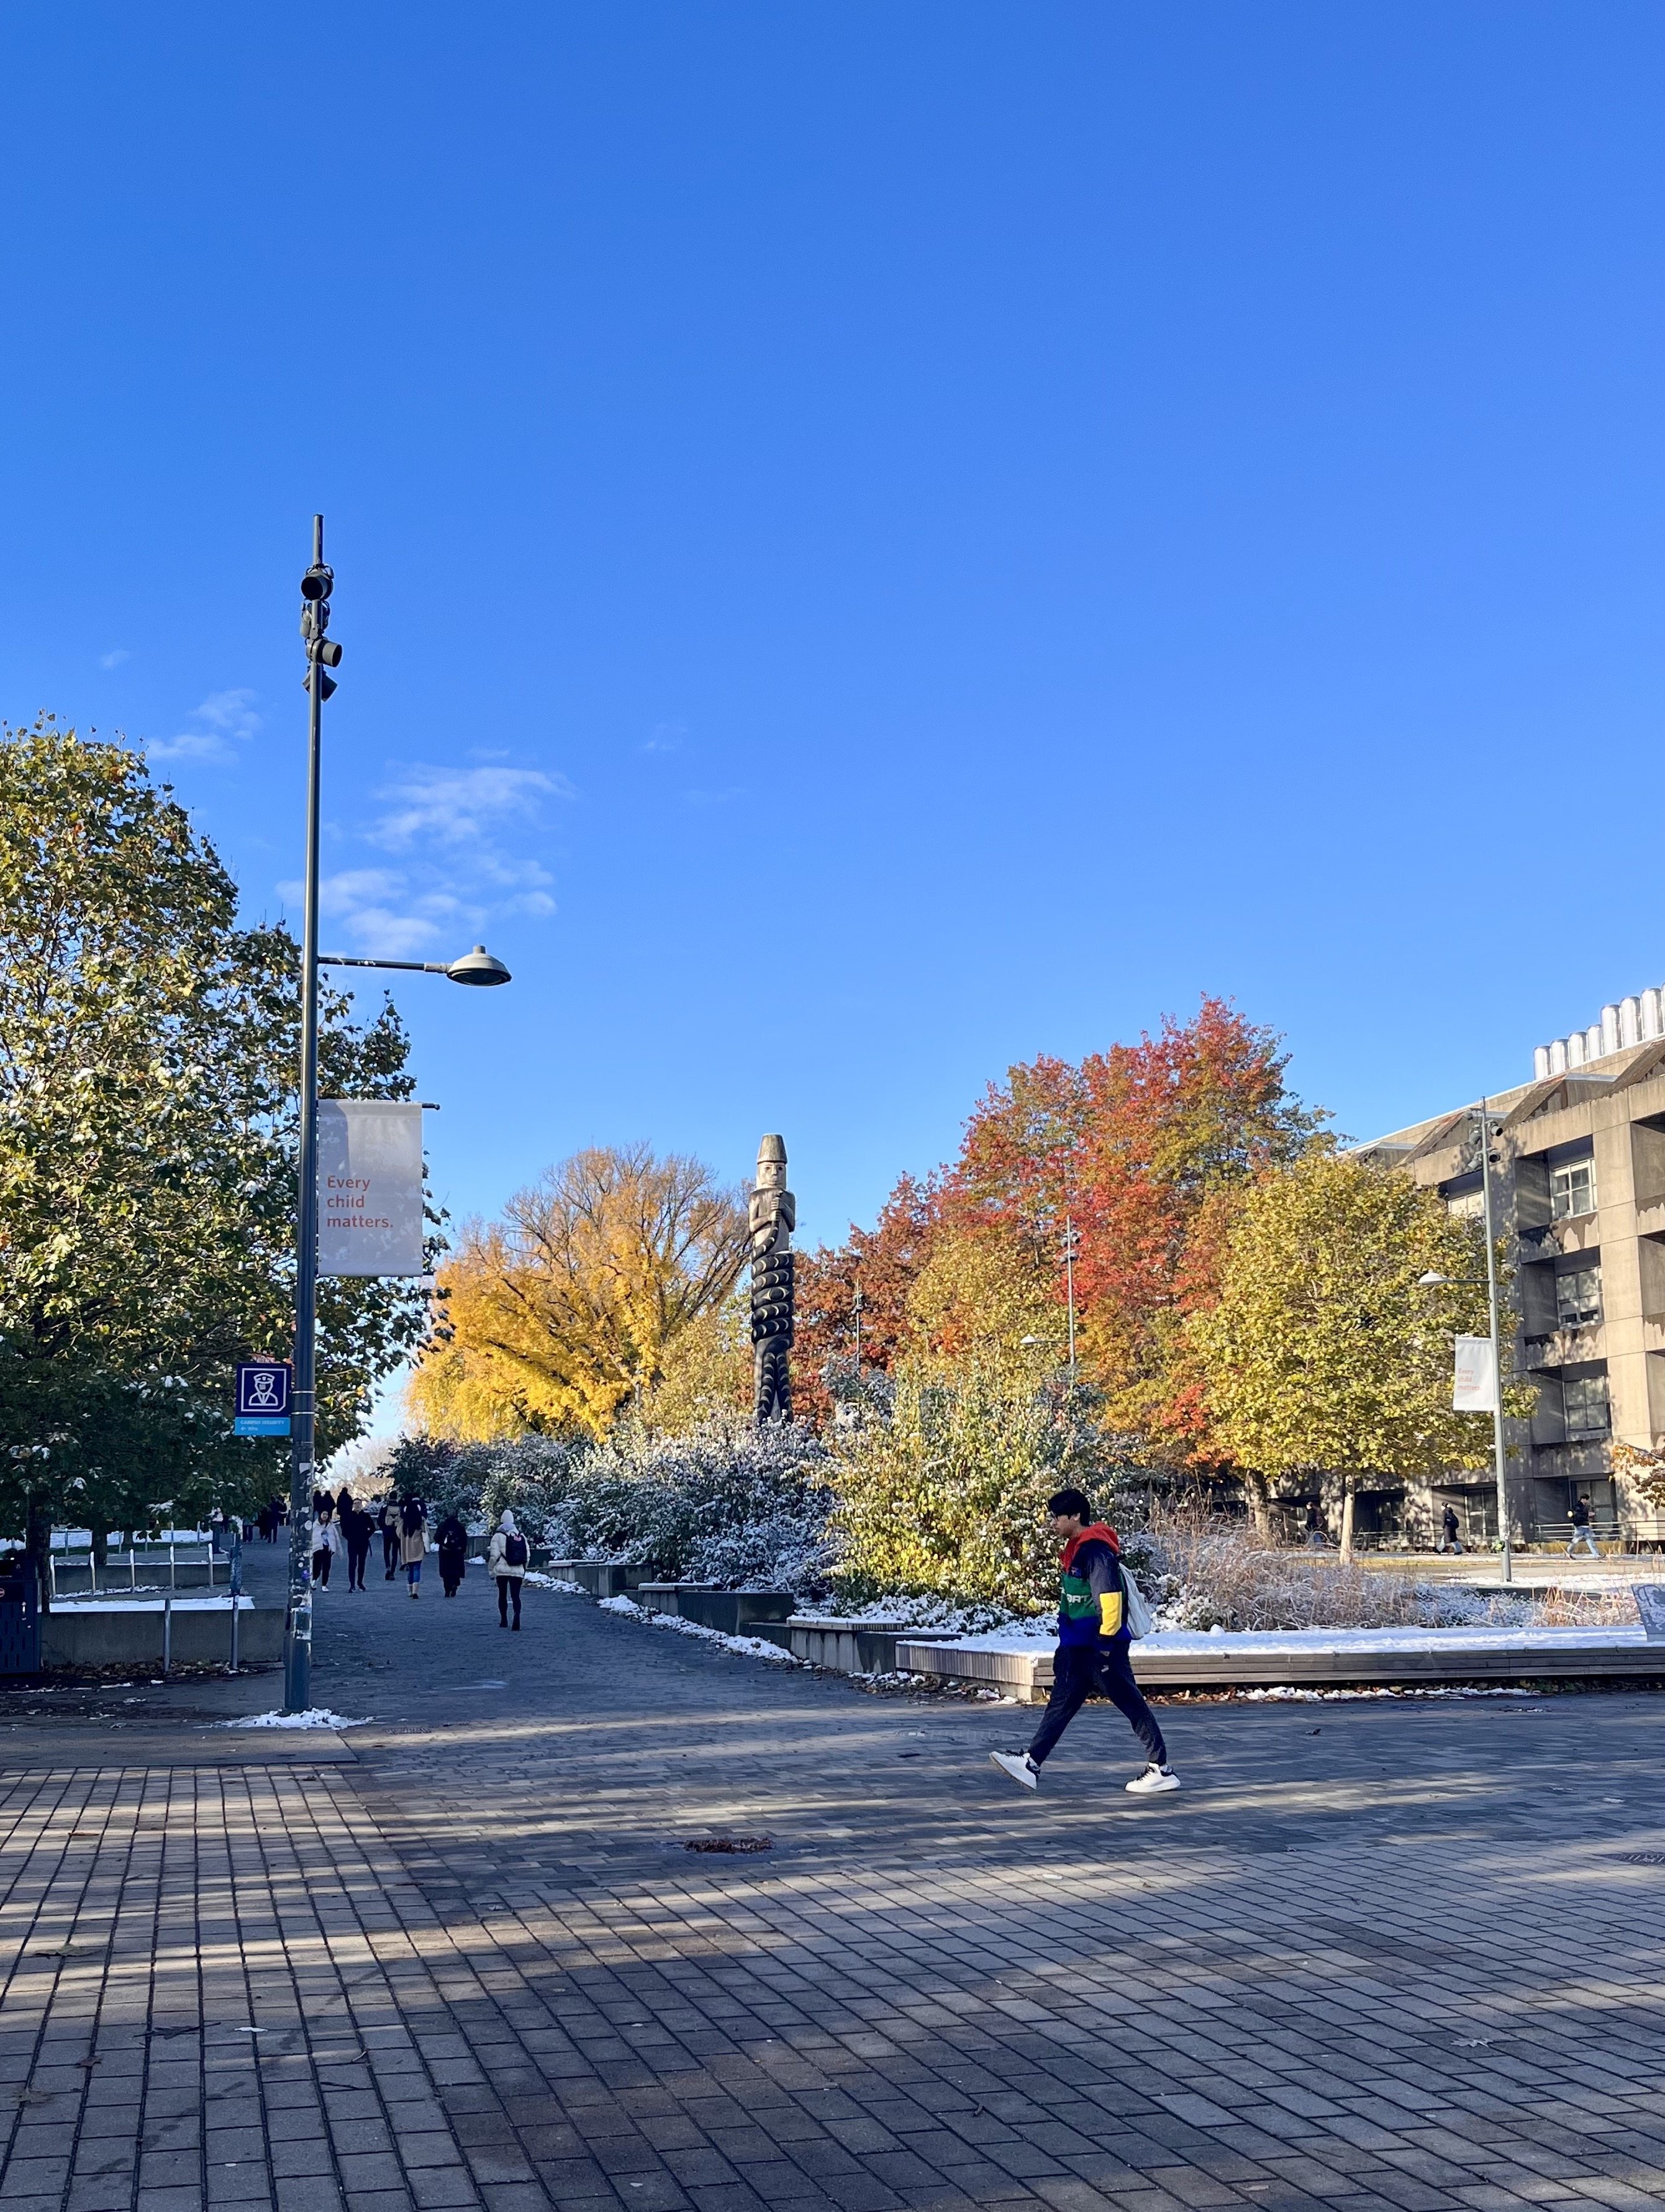 Students stroll through the plaza outside the bookstore on the way to class.